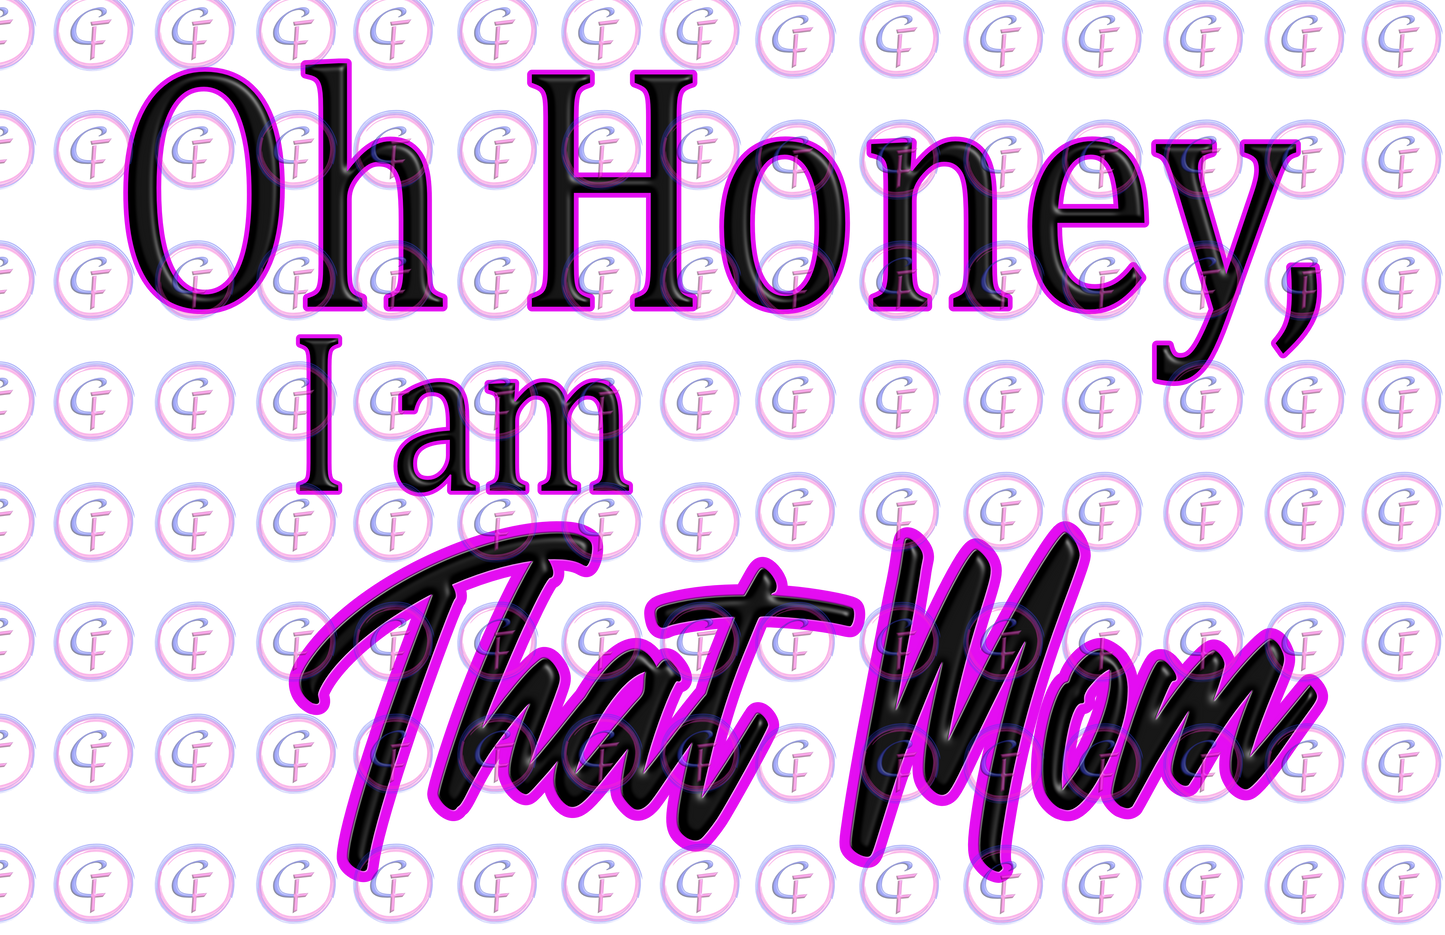 That Mom PNG Design